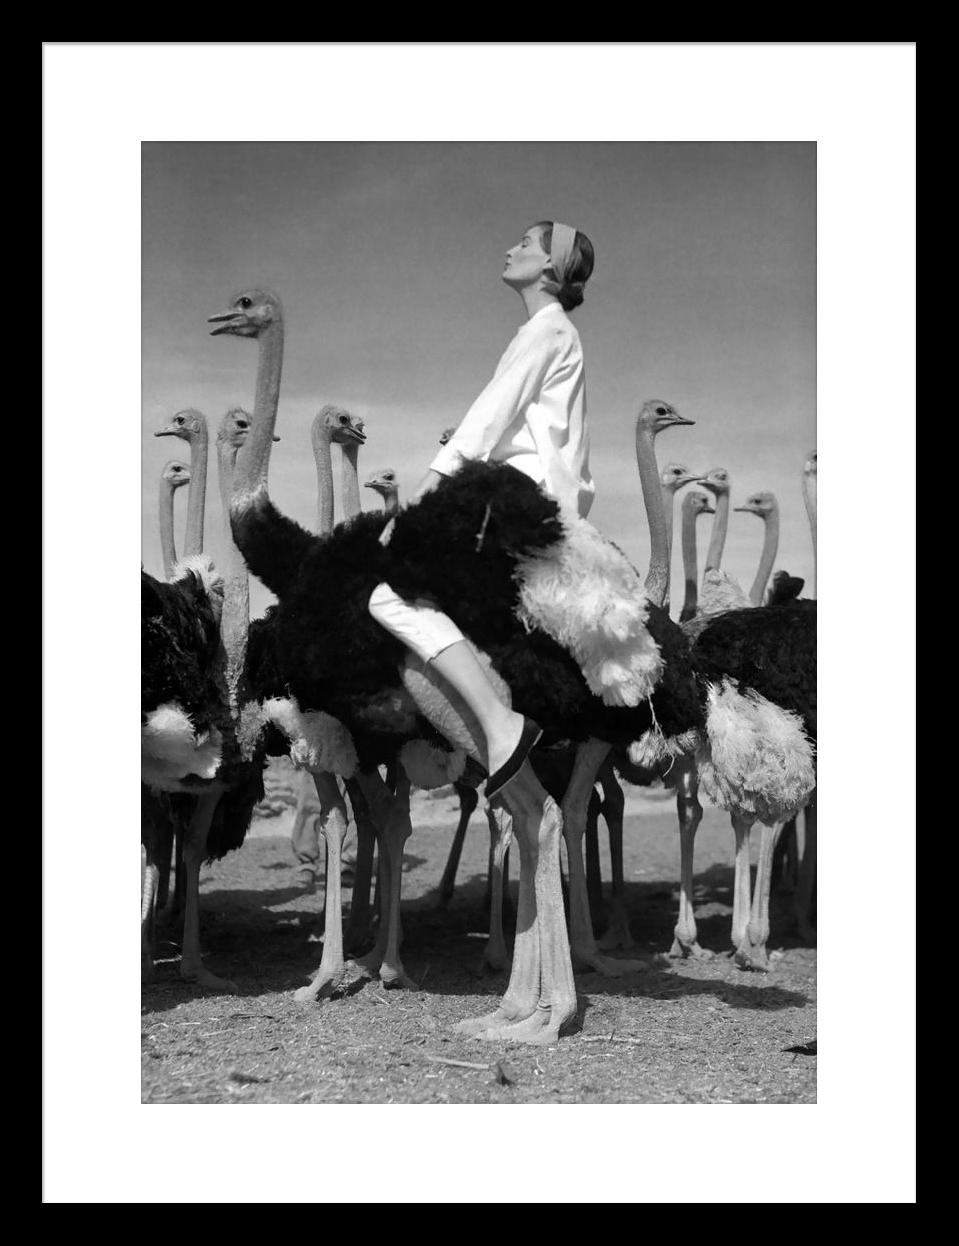 WENDA  AND OSTRICHES. BRITISH VOGUE, SOUTH AFRICA, MAY 1951